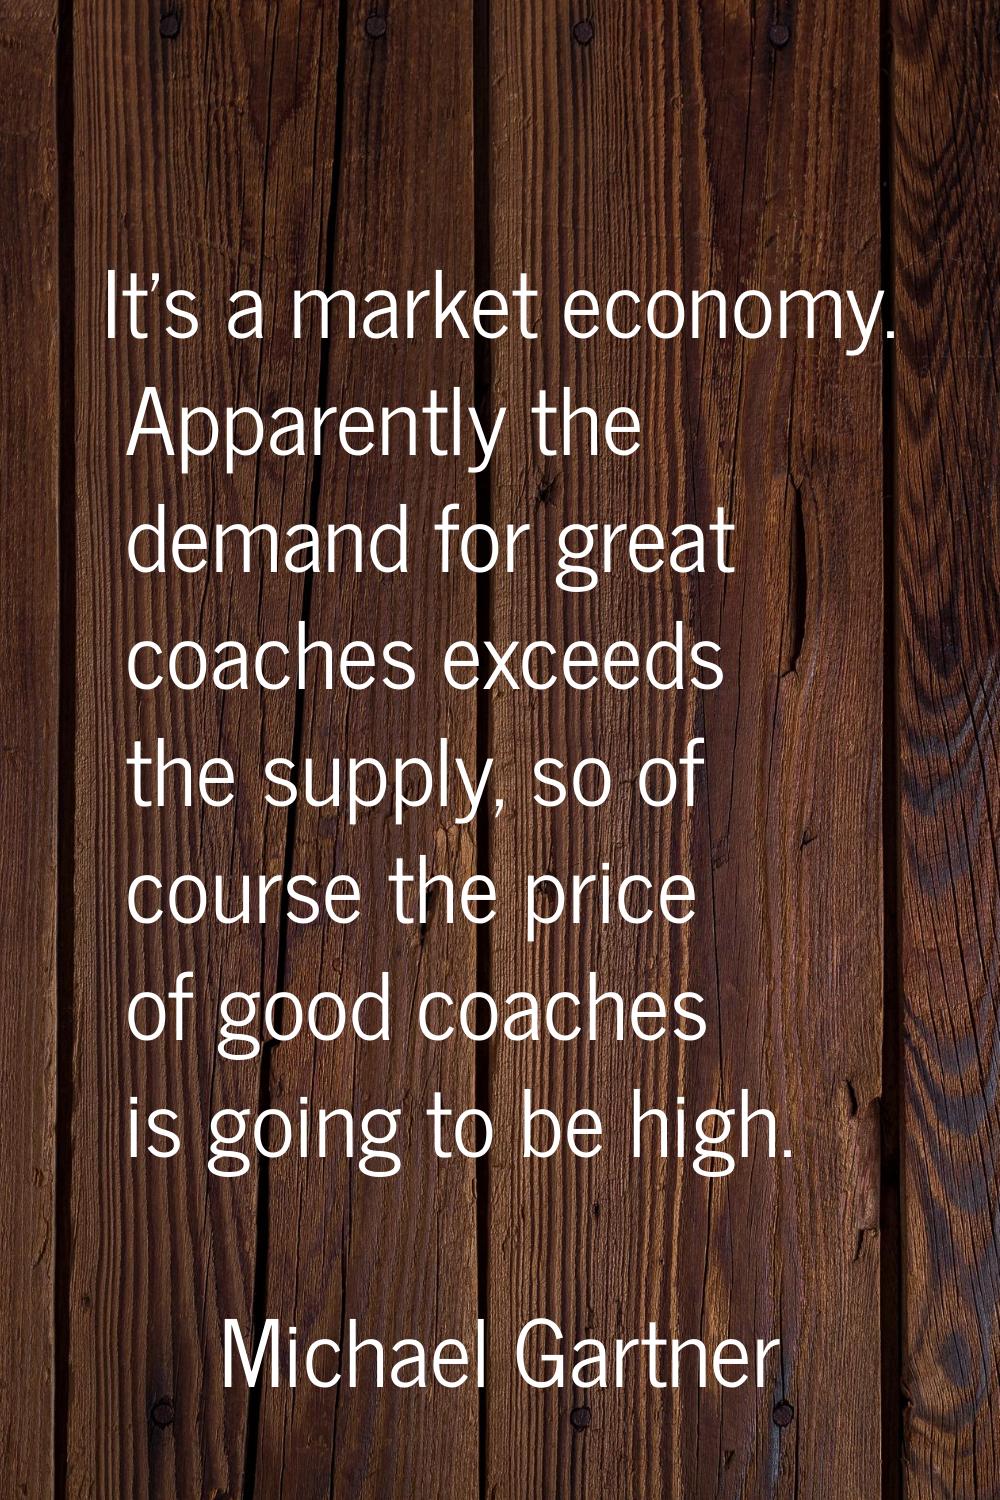 It's a market economy. Apparently the demand for great coaches exceeds the supply, so of course the